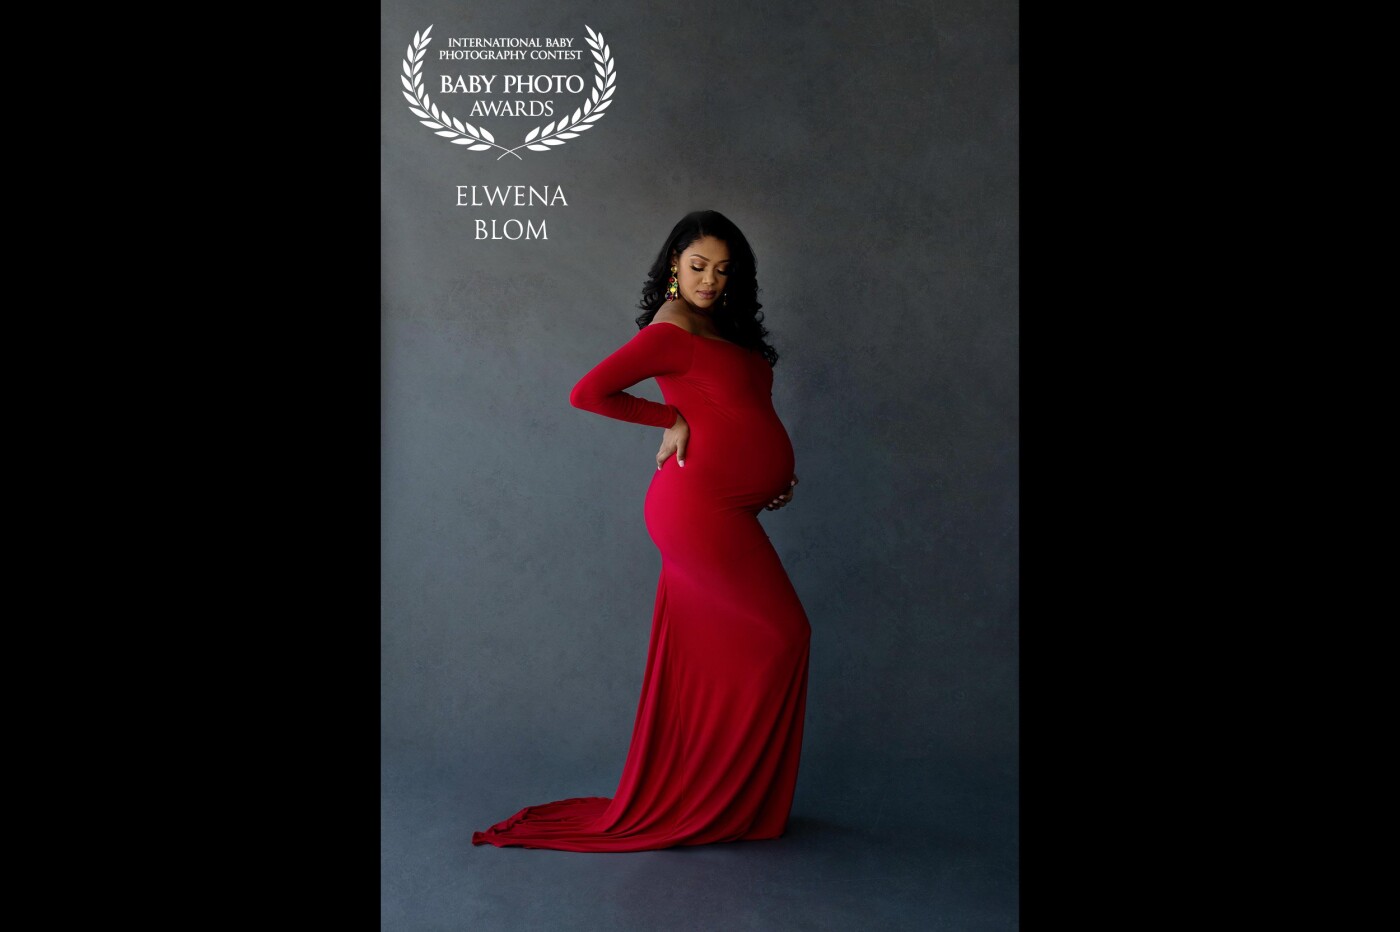 That red dress just takes everyone's breath away, especially against the dark background. This gorgeous mom is as bold as this dress and was just as breathtaking.